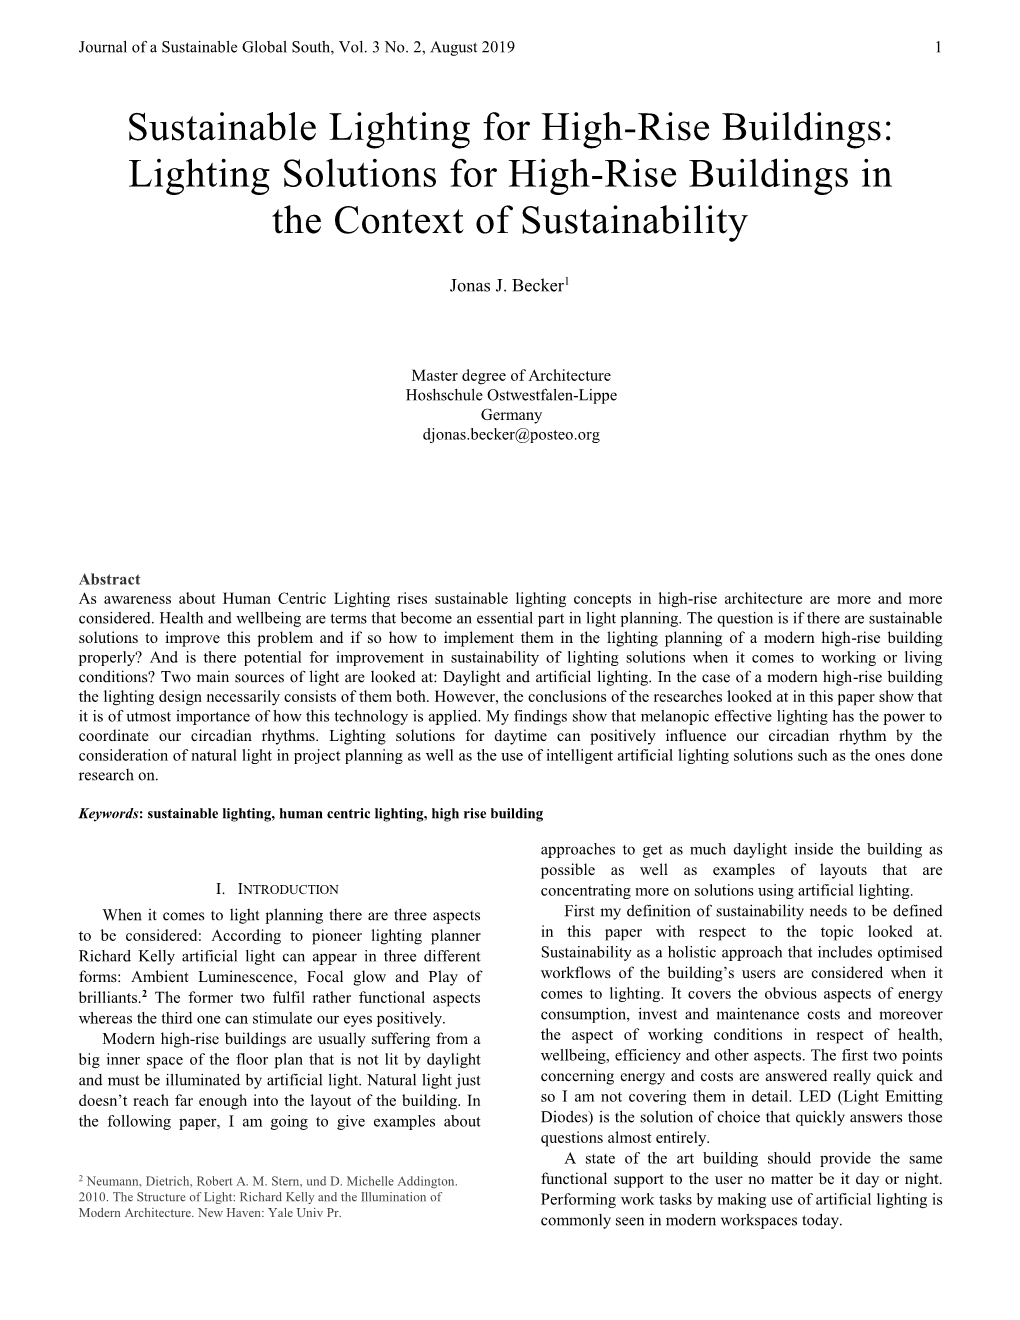 Sustainable Lighting for High-Rise Buildings: Lighting Solutions for High-Rise Buildings in the Context of Sustainability